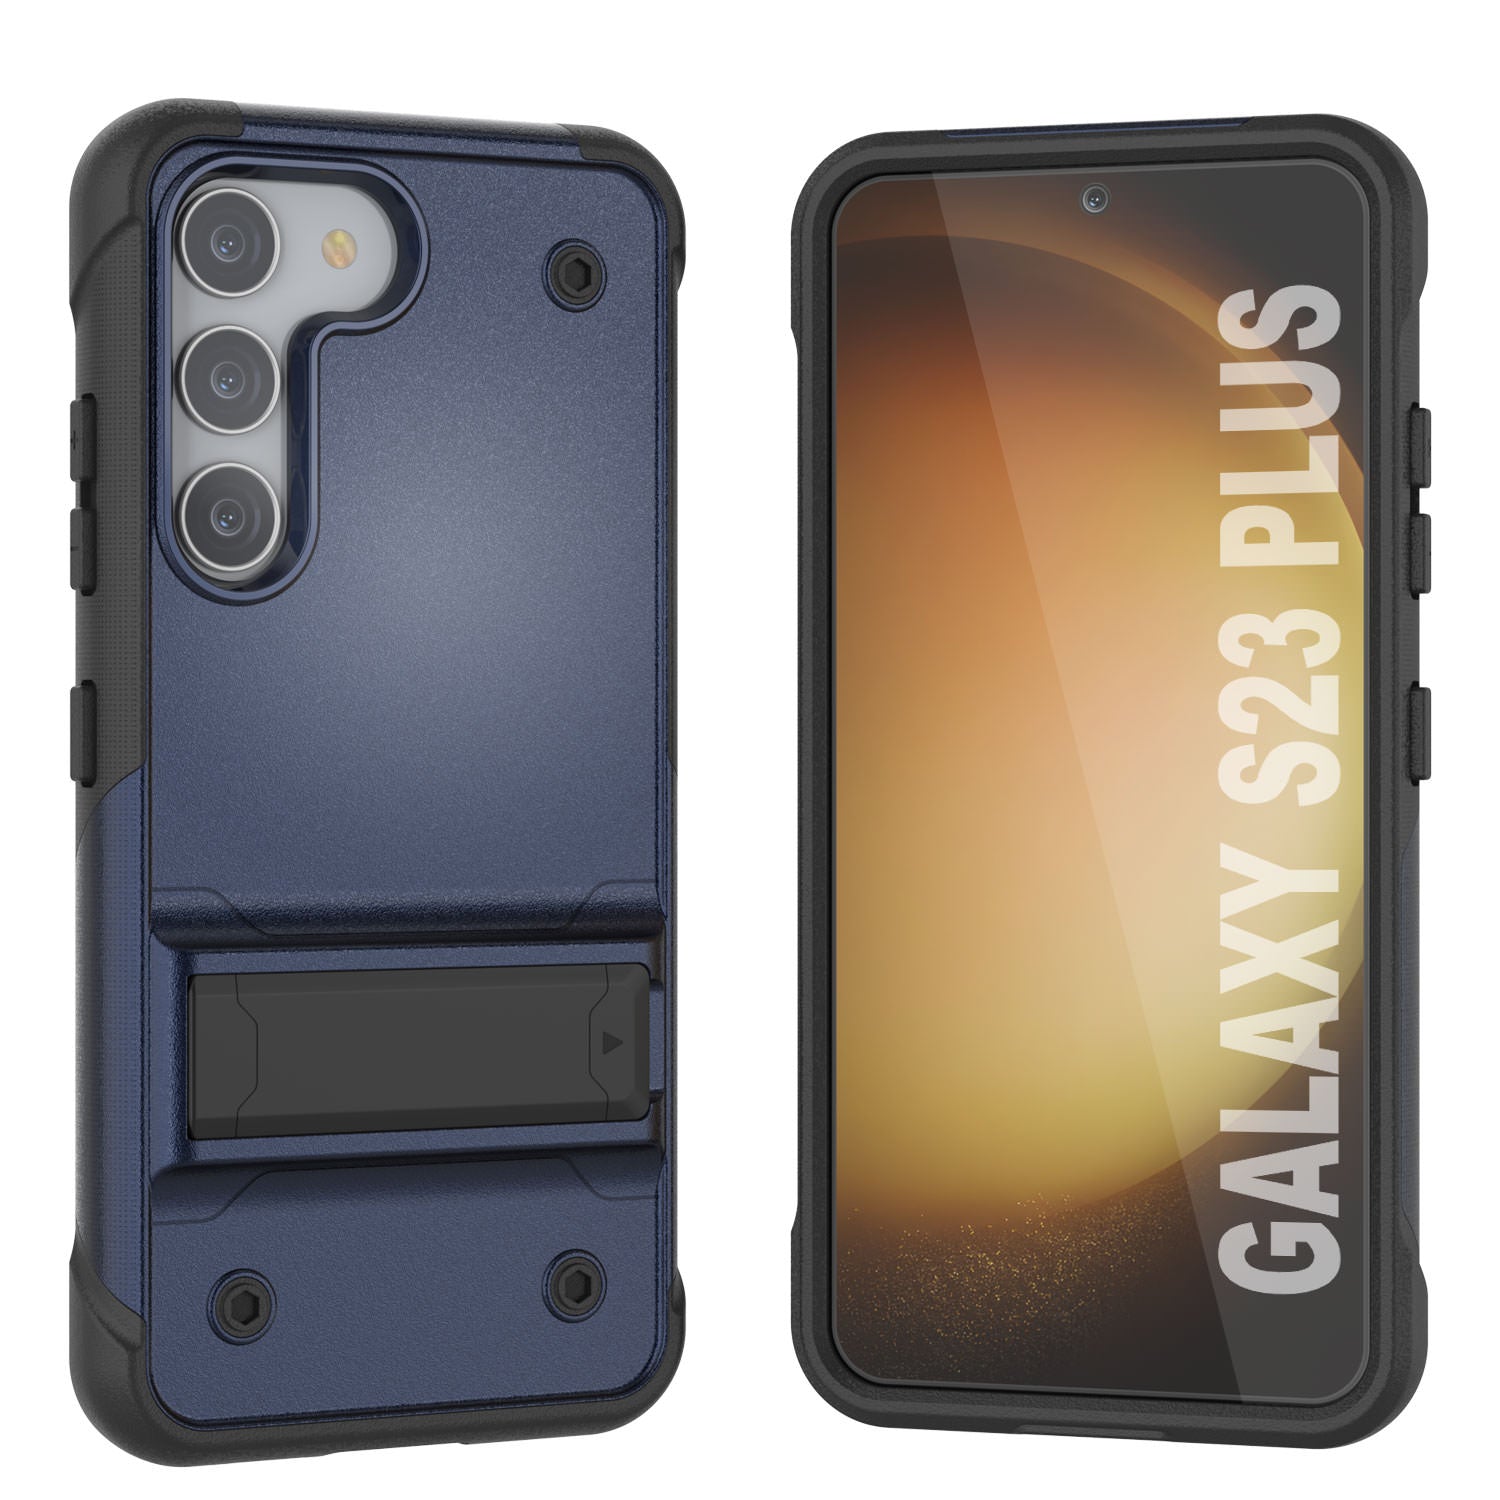 Punkcase Galaxy S23+ Plus Case [Reliance Series] Protective Hybrid Military Grade Cover W/Built-in Kickstand [Navy-Black]